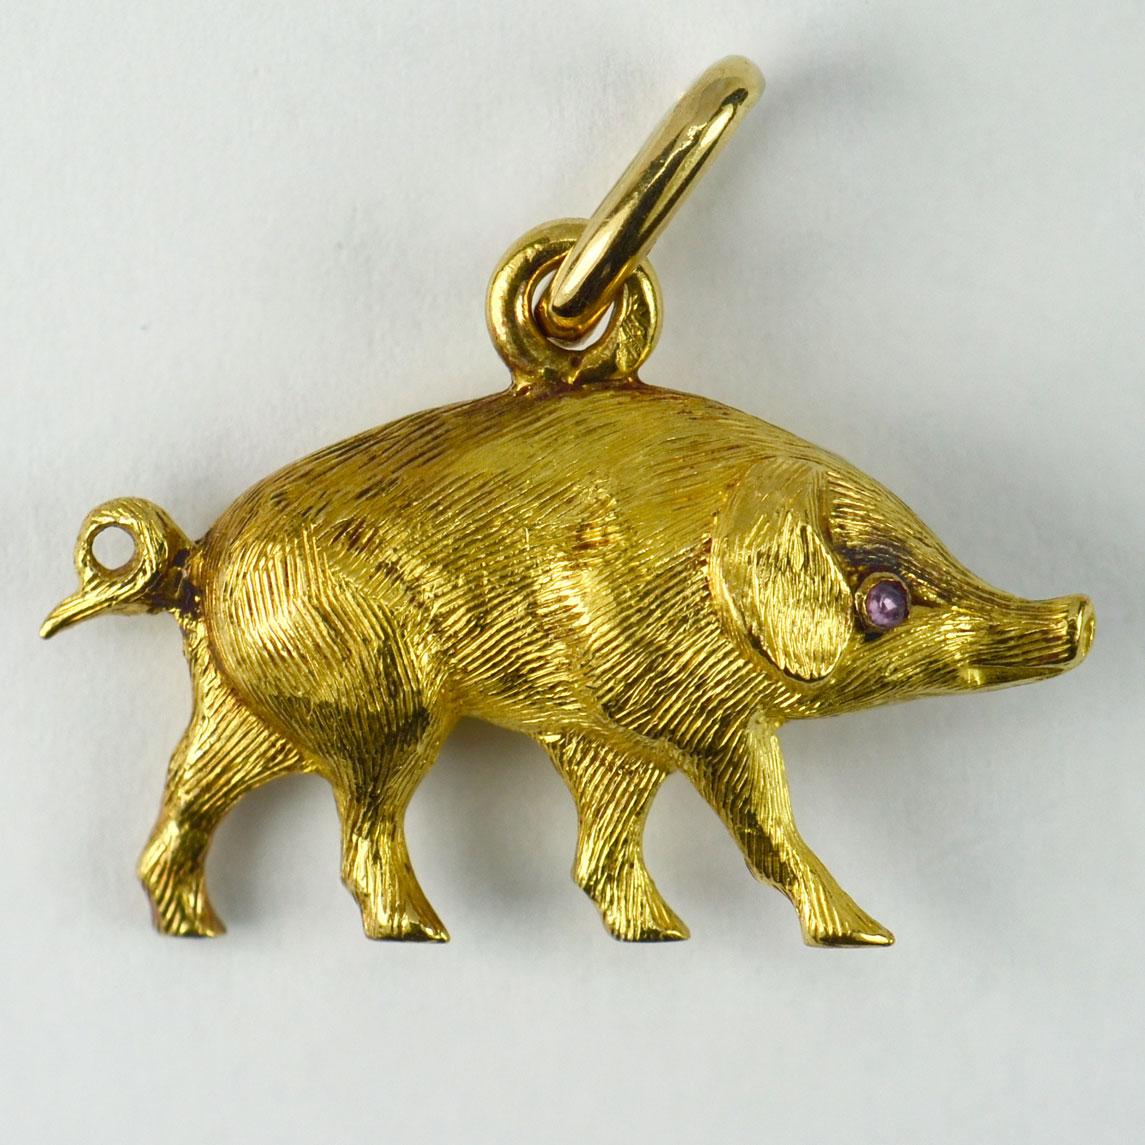 A French 18 karat (18K) yellow gold charm pendant realistically designed as 3-dimensional pig with rose-cut ruby eyes. Stamped with the eagle’s head for French manufacture and 18 karat gold.

Dimensions: 1.7 x 2.5 x 0.7 cm (not including jump